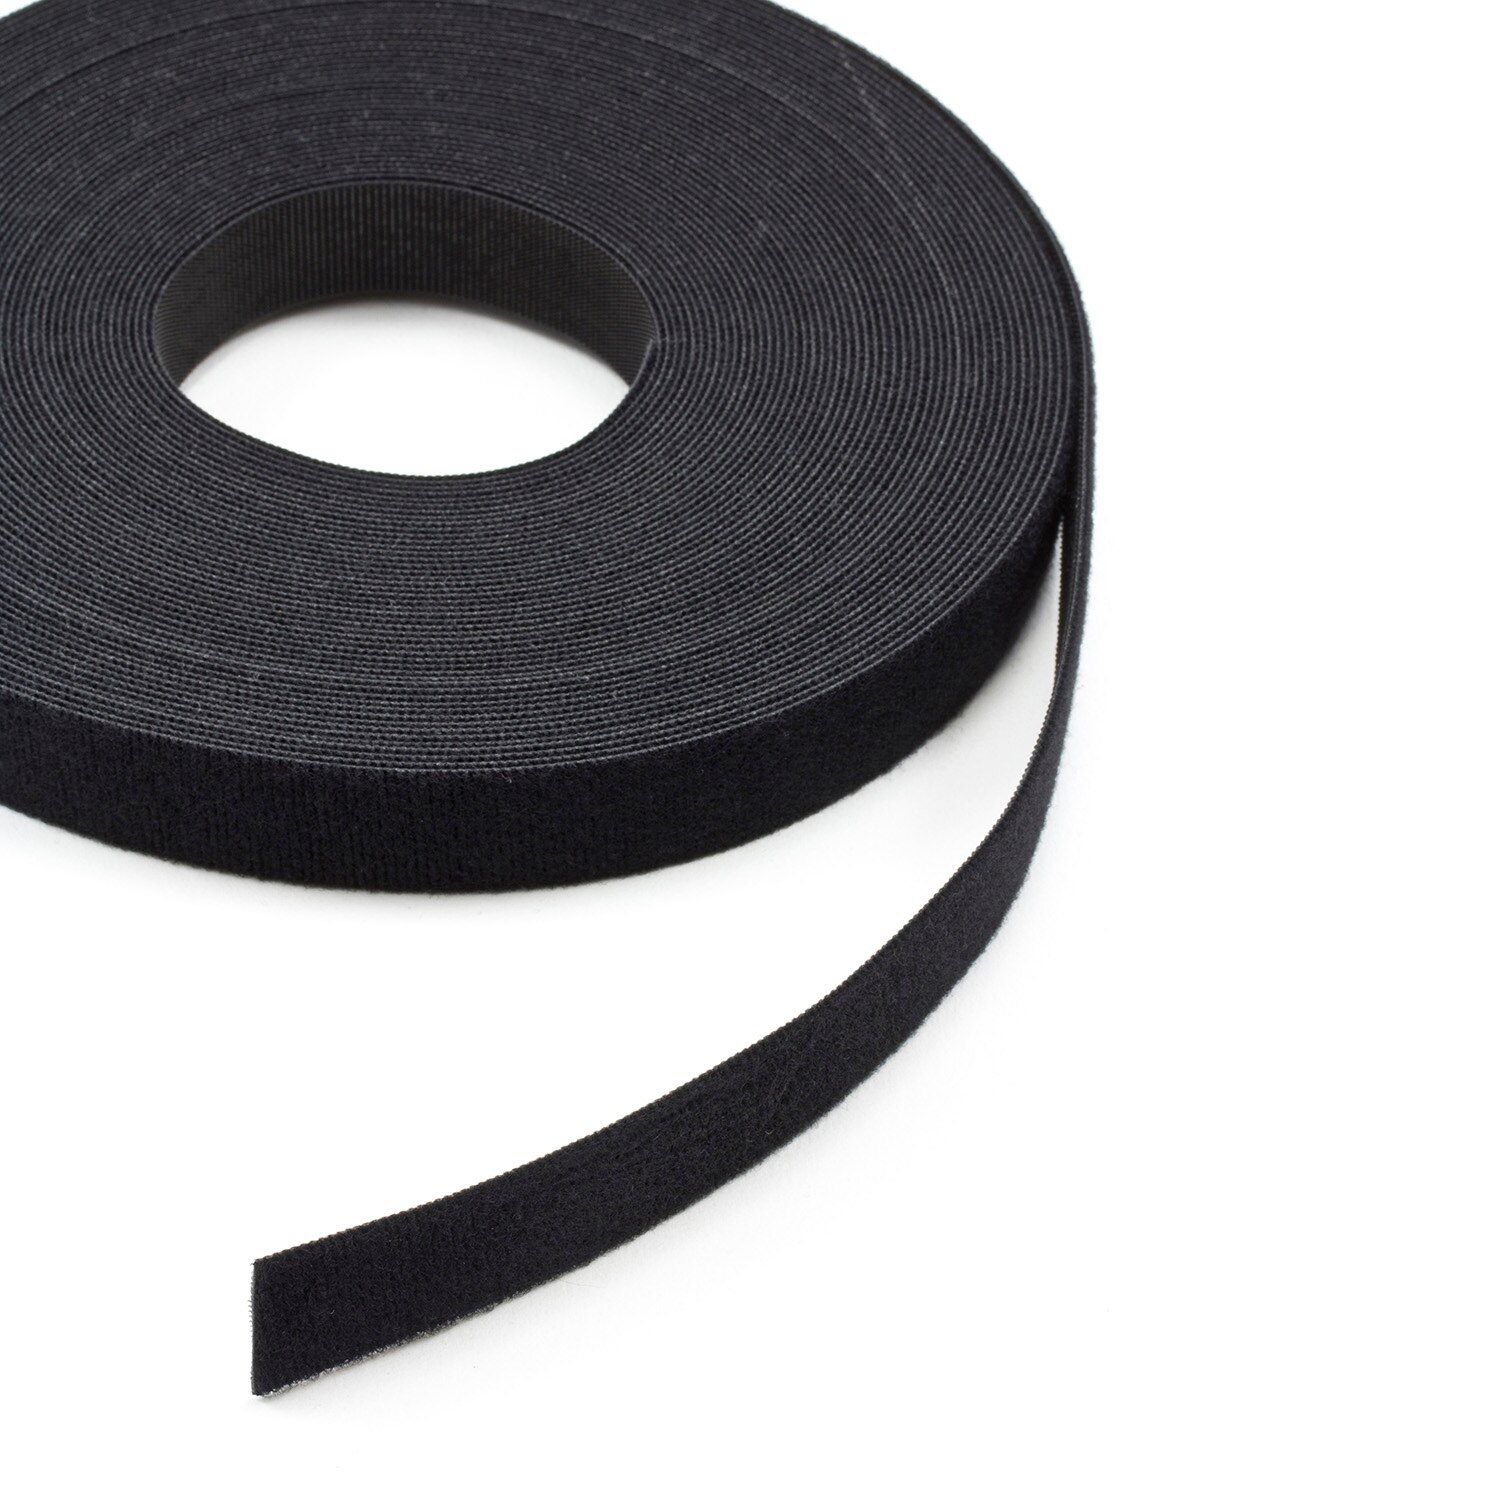 VELCRO® Brand ONE-WRAP® Tape 6 x 25 yard roll sold by Industrial Webbing  Corp